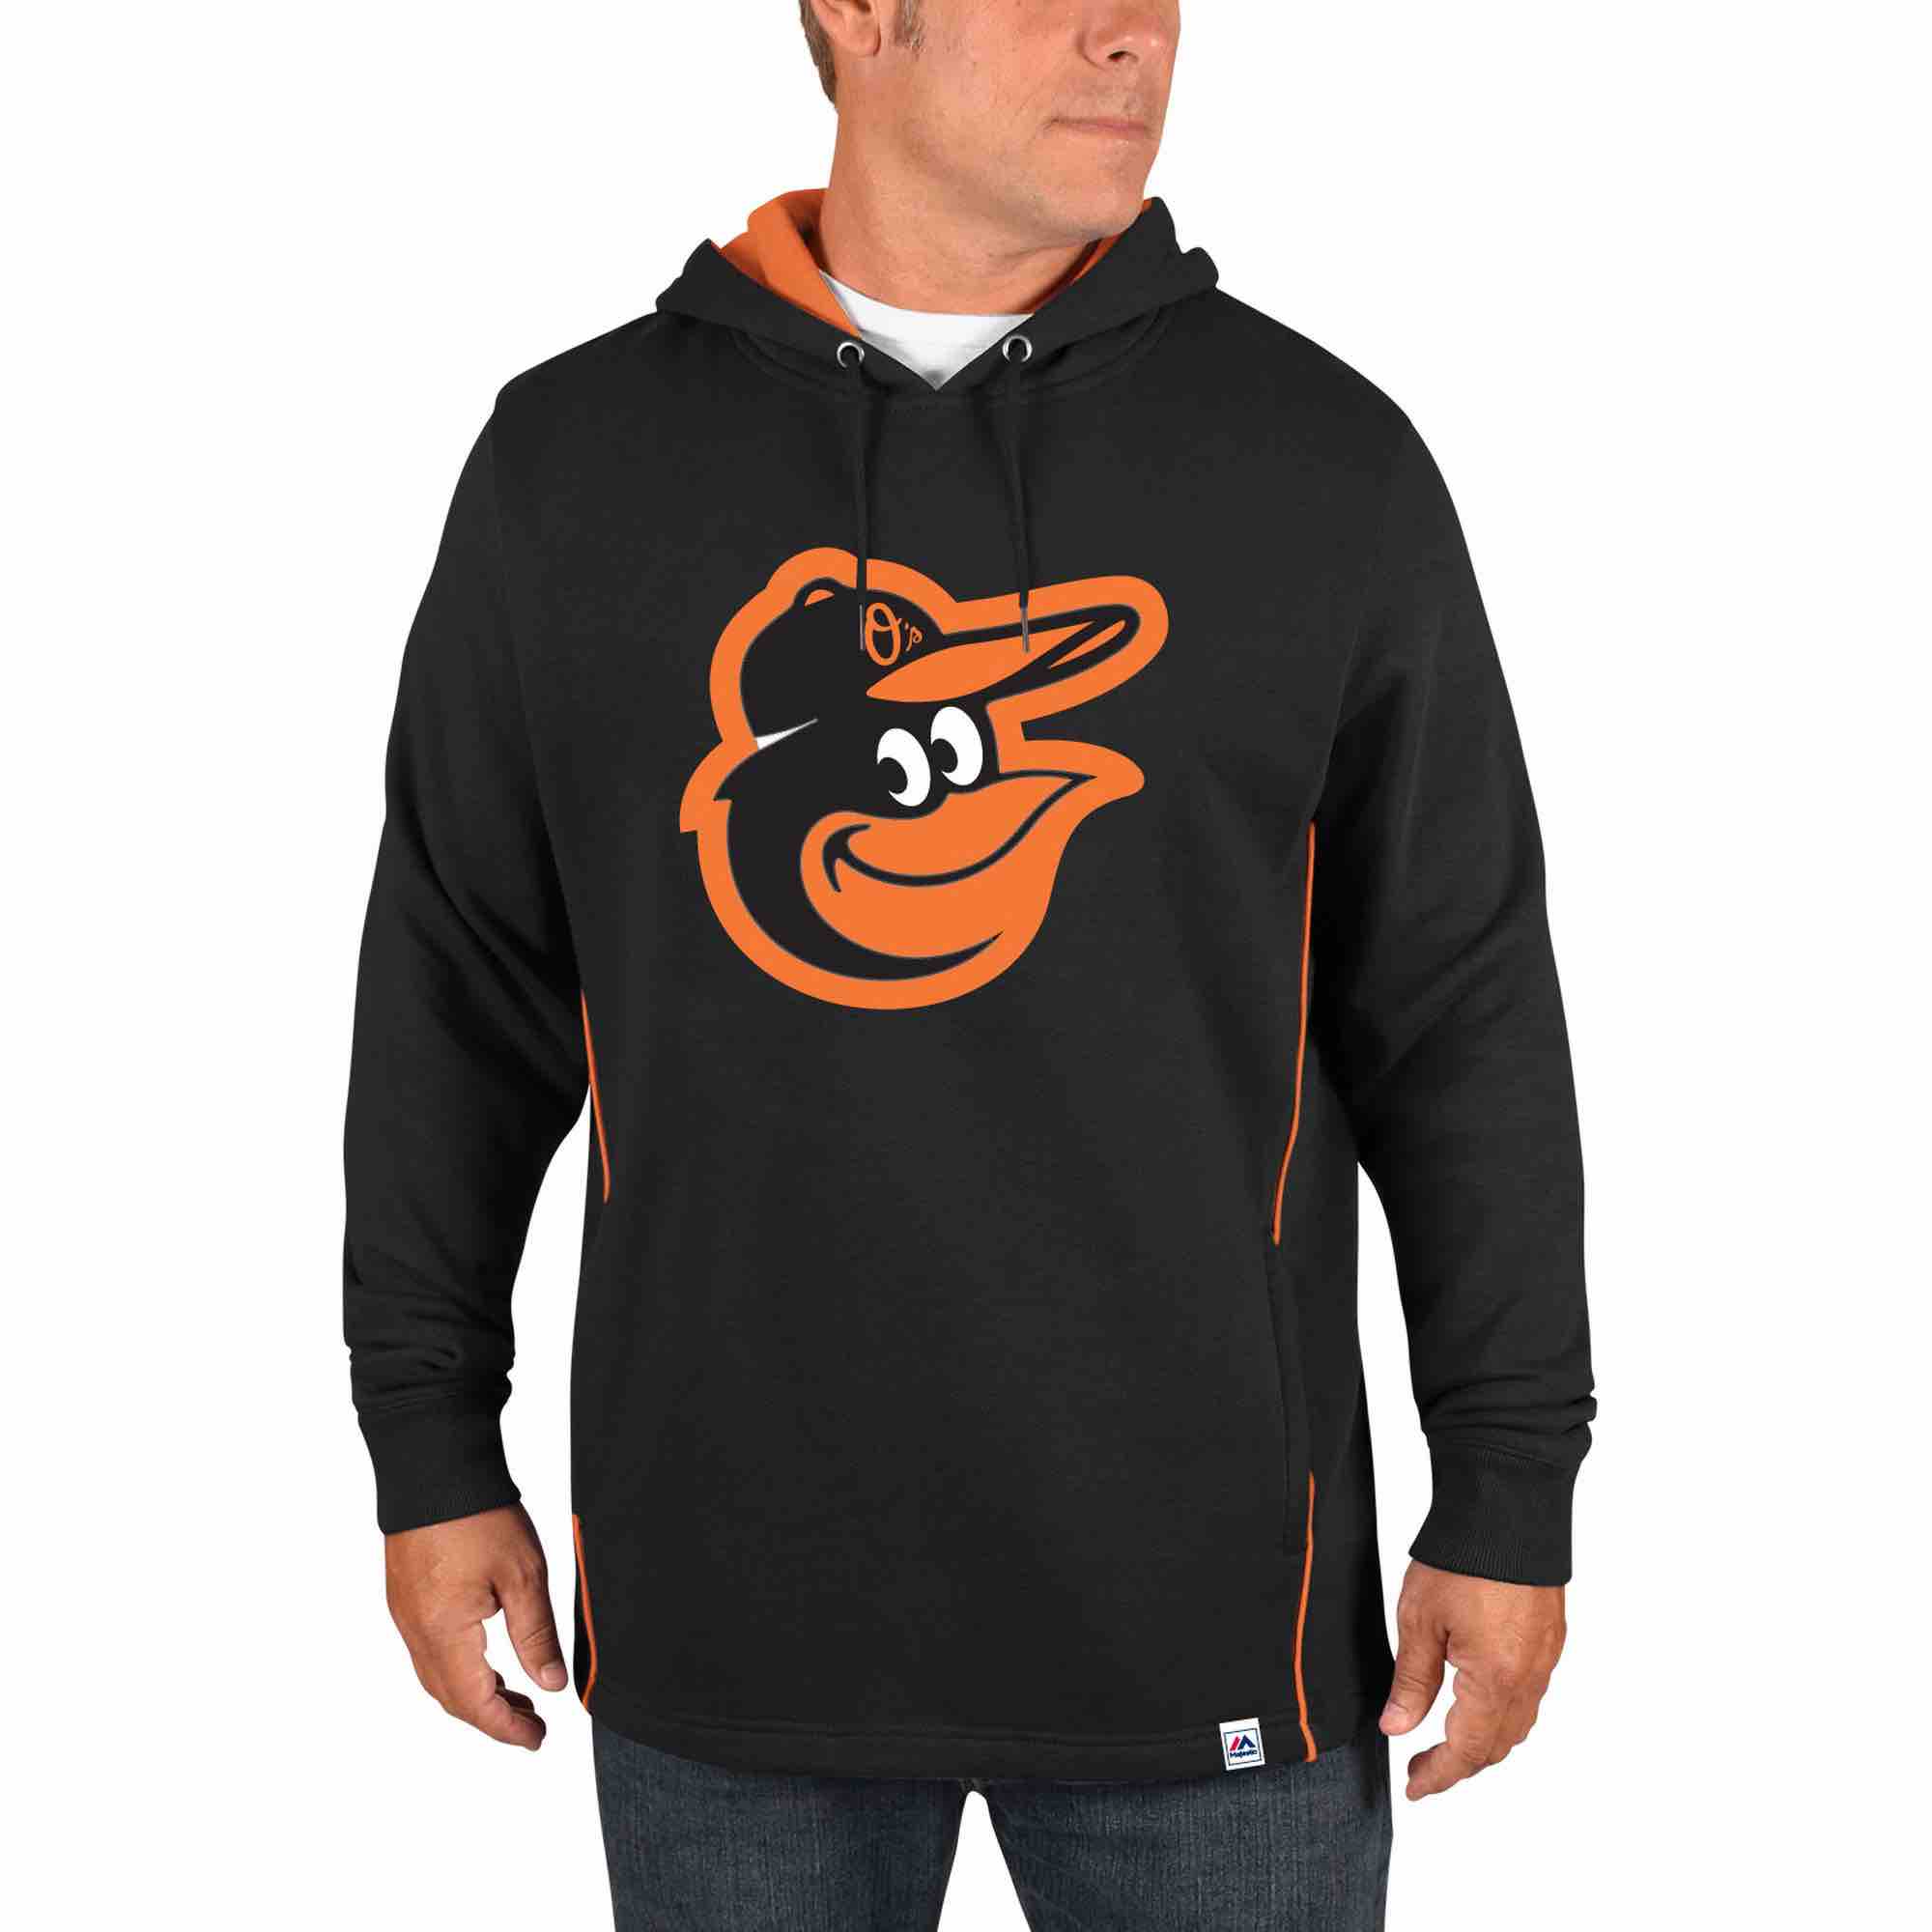 MLB Baltimore Orioles Personalized Black Stitched Hoodie